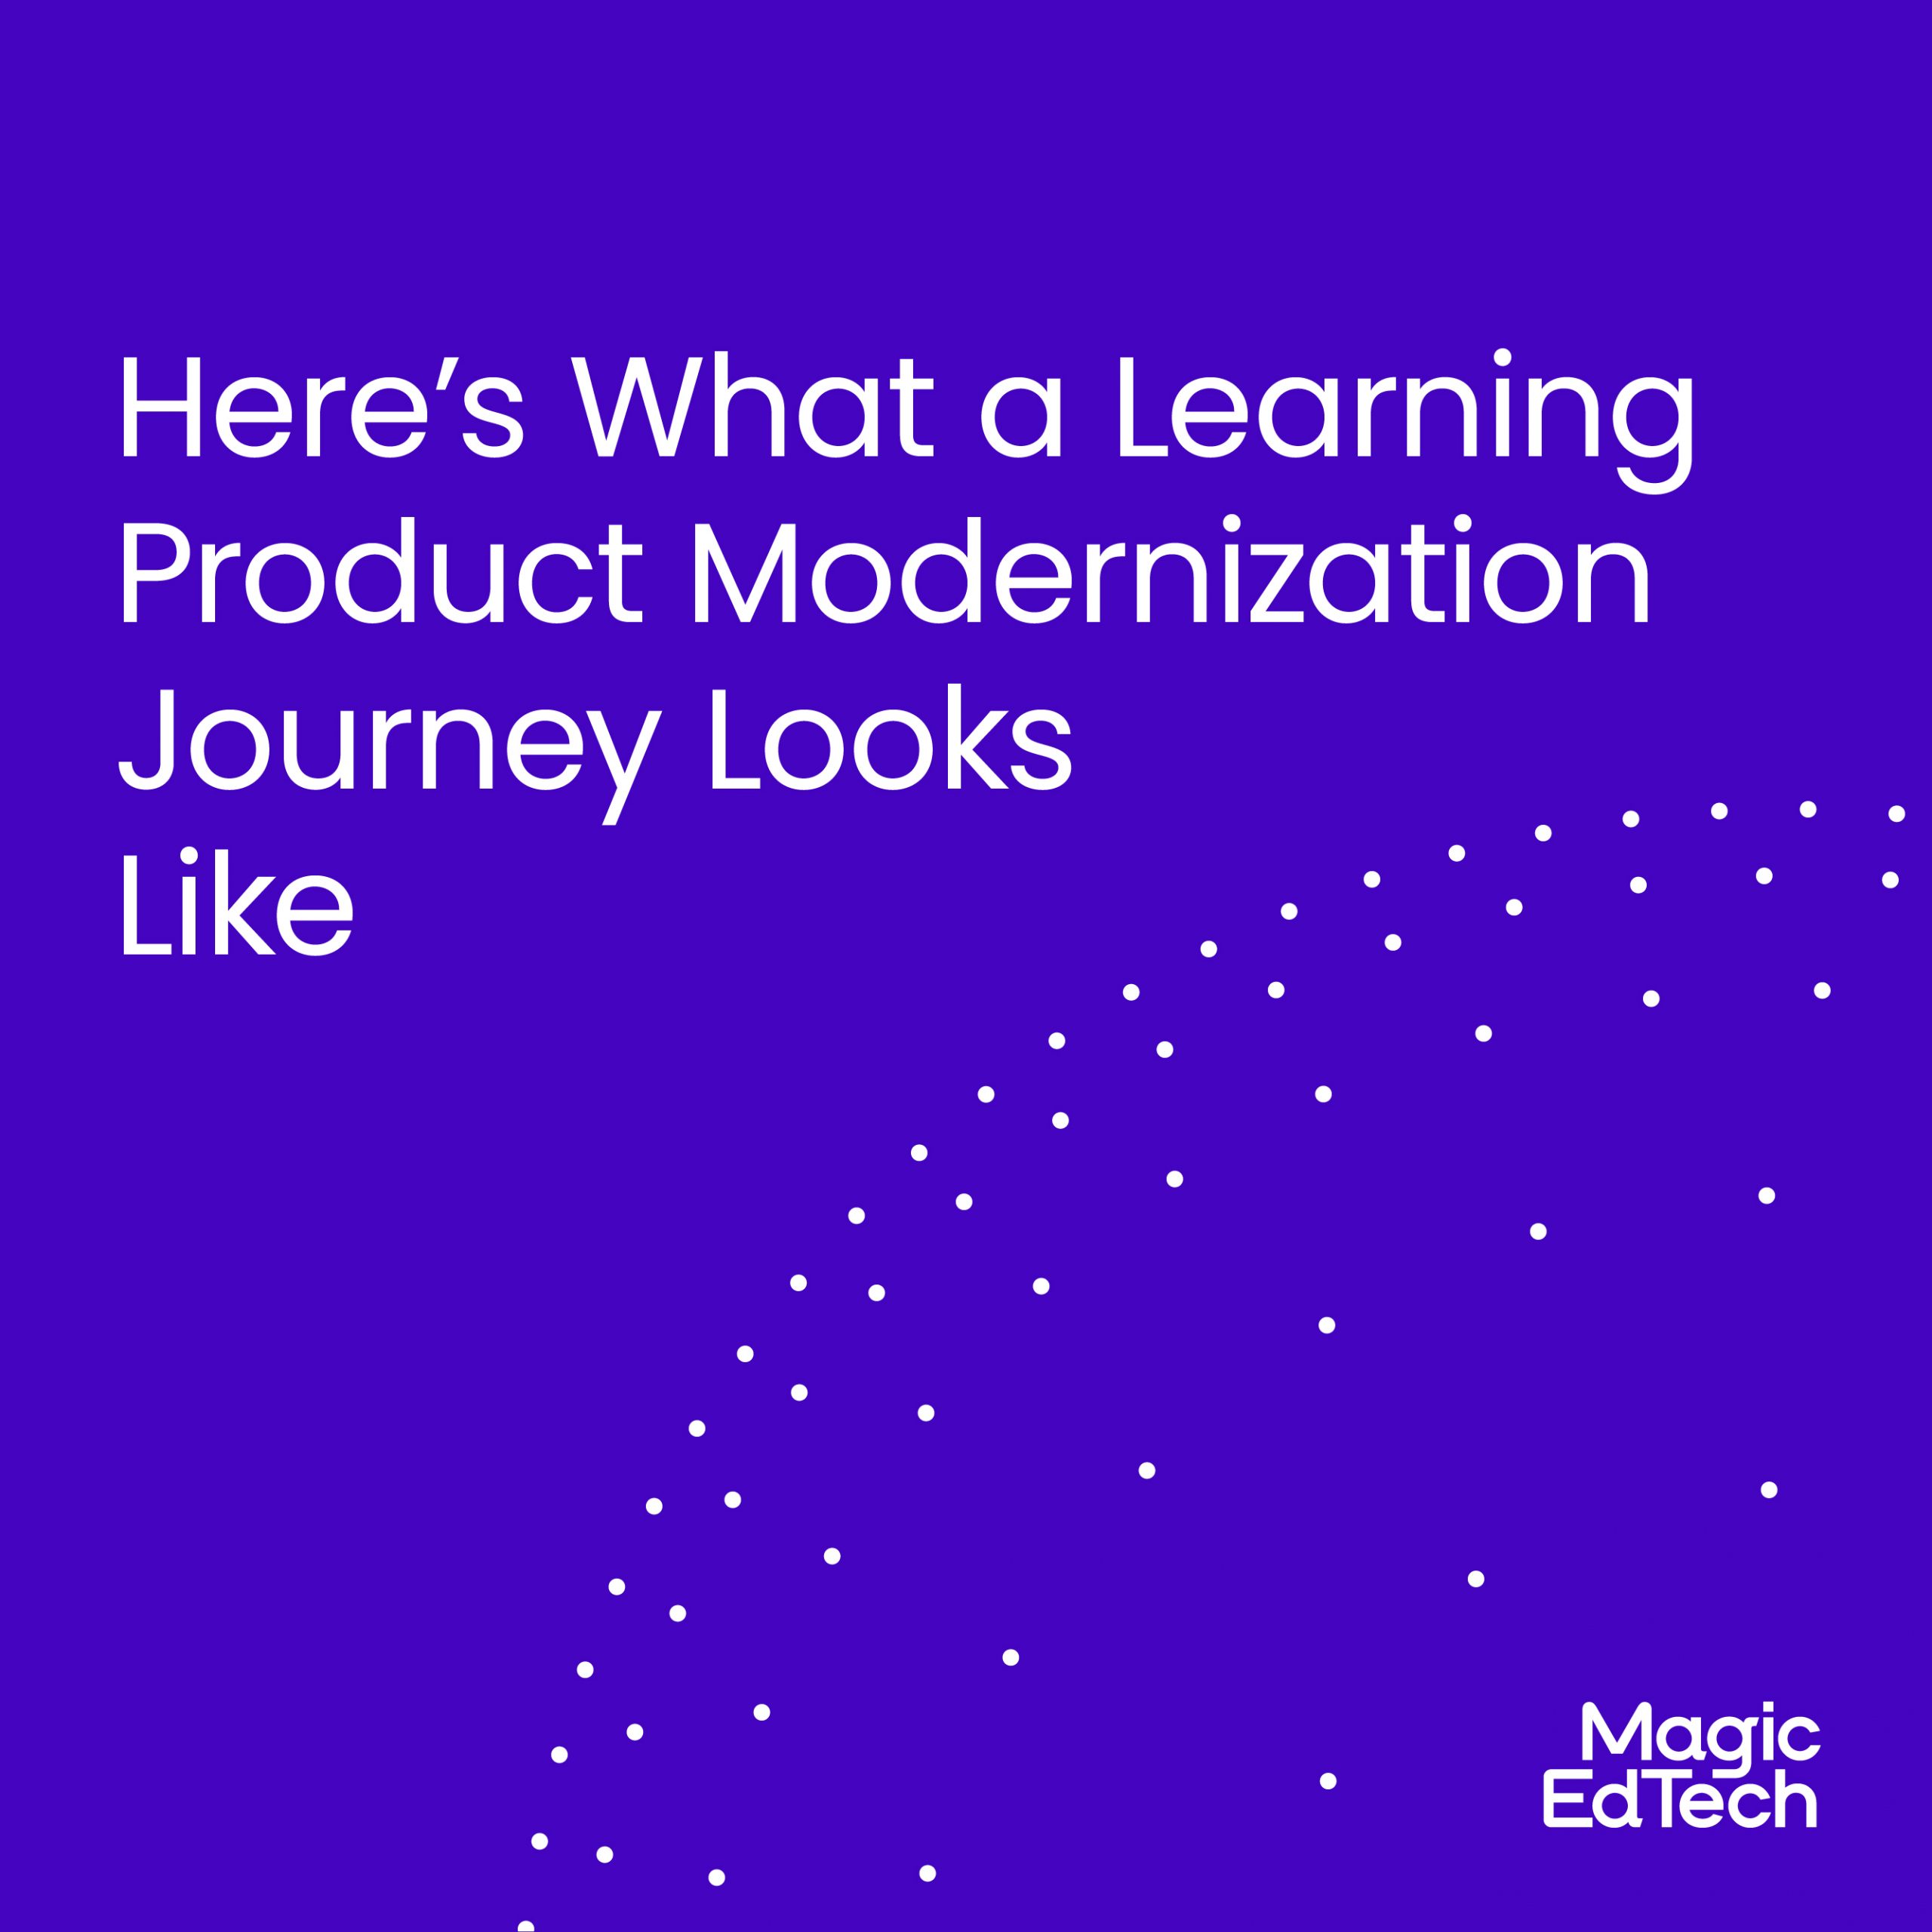 Here’s What a Learning Product Modernization Journey Looks Like